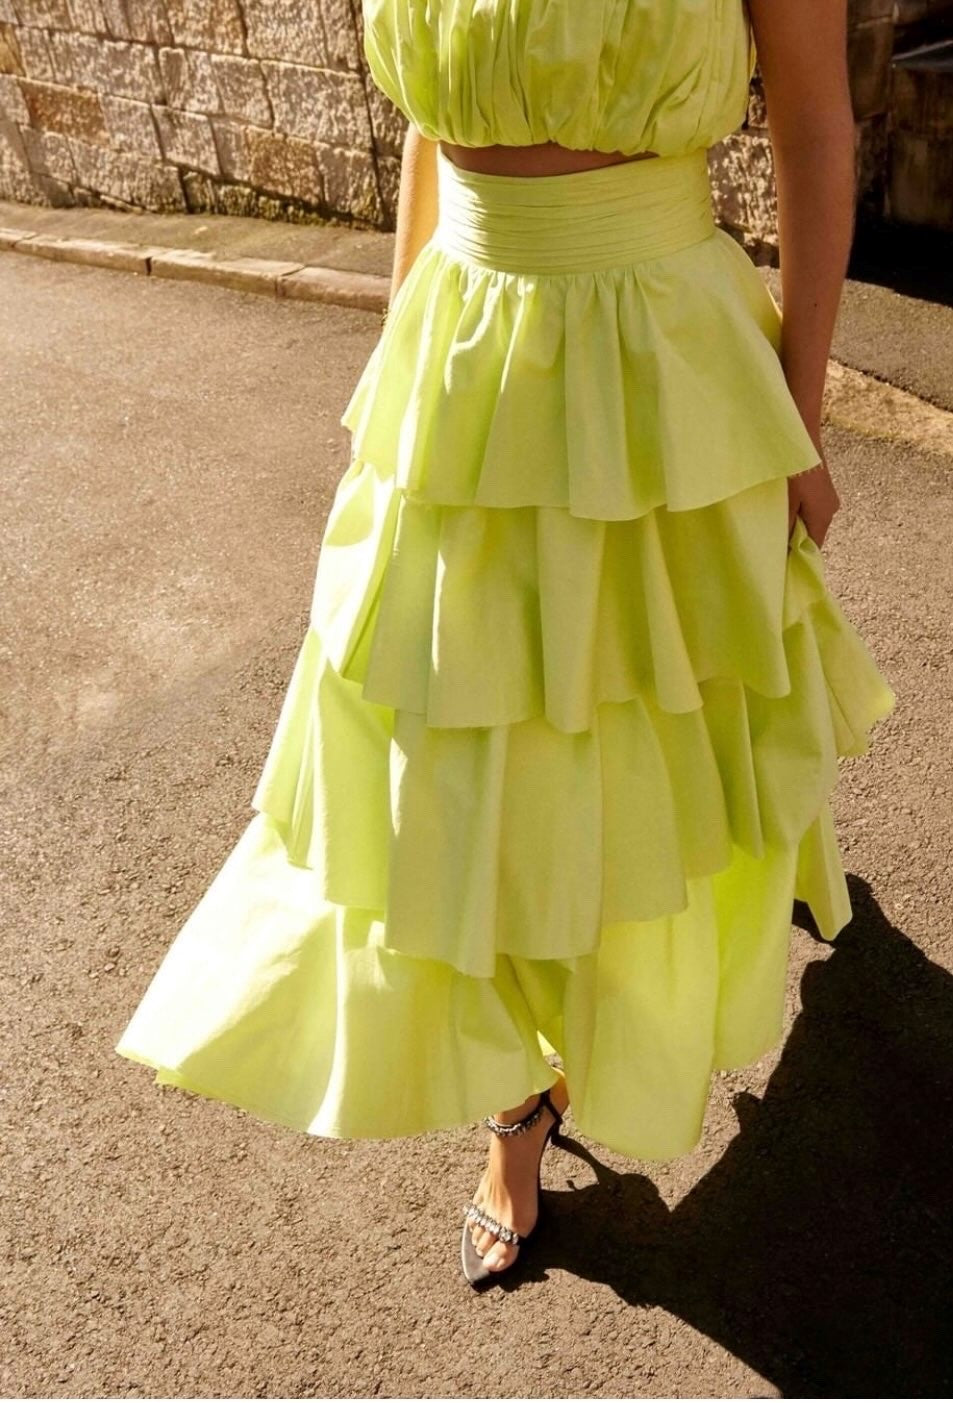 Hire AJE Set Medina Tiered Midi Skirt and Ruched Cropped Top in Light Lemon